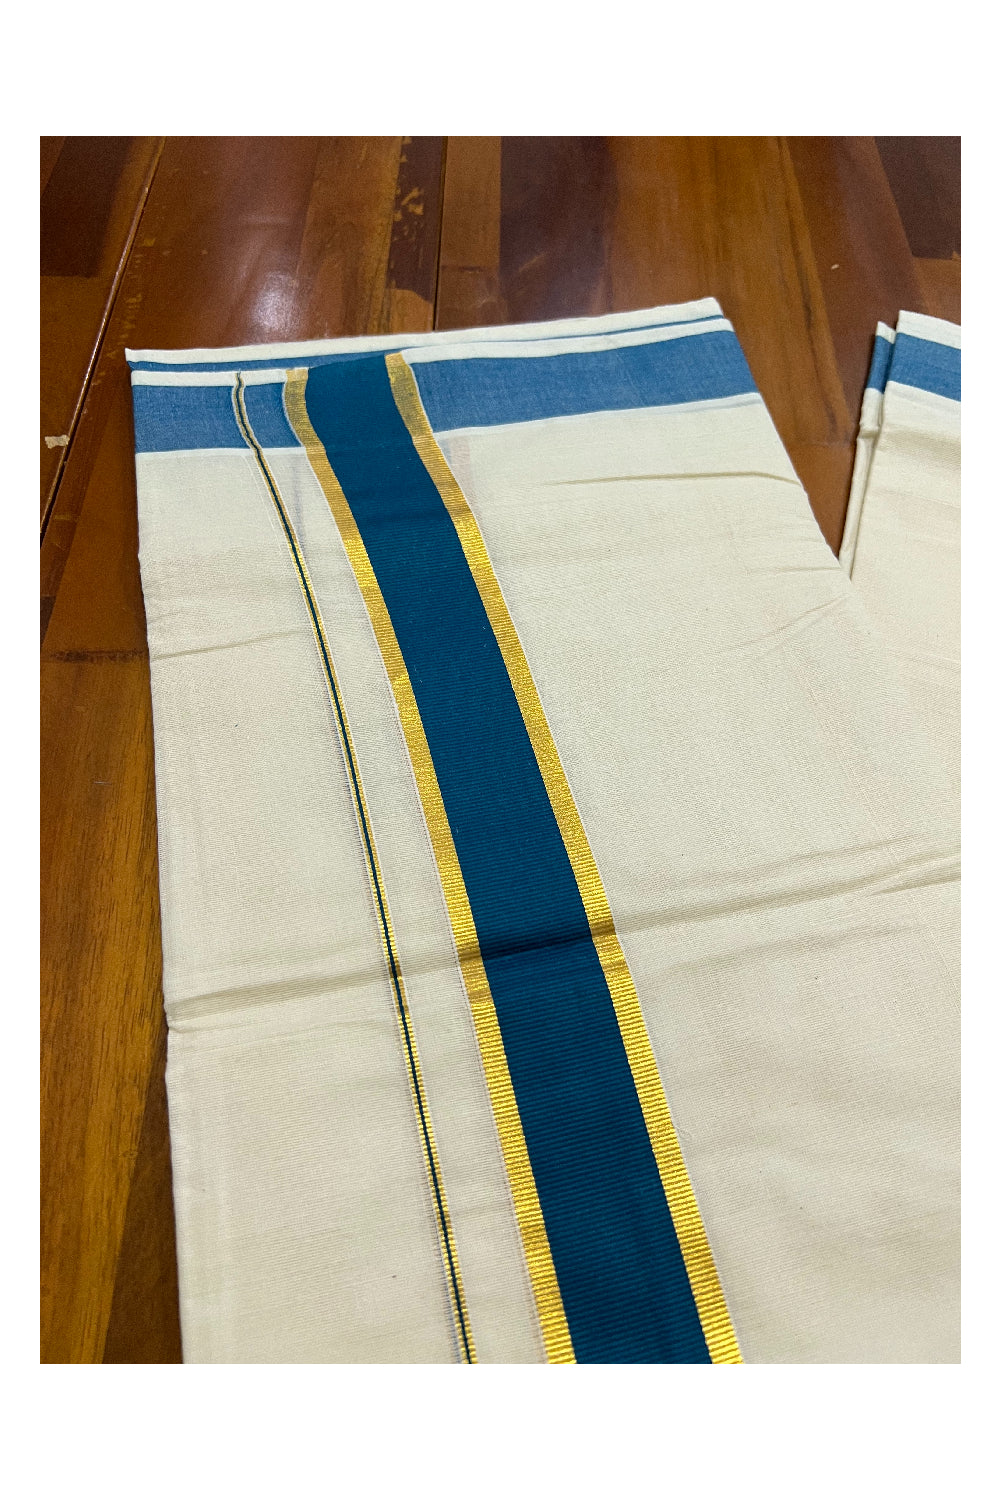 Off White Kerala Double Mundu with Kasavu and Teal Green Border (South Indian Dhoti)